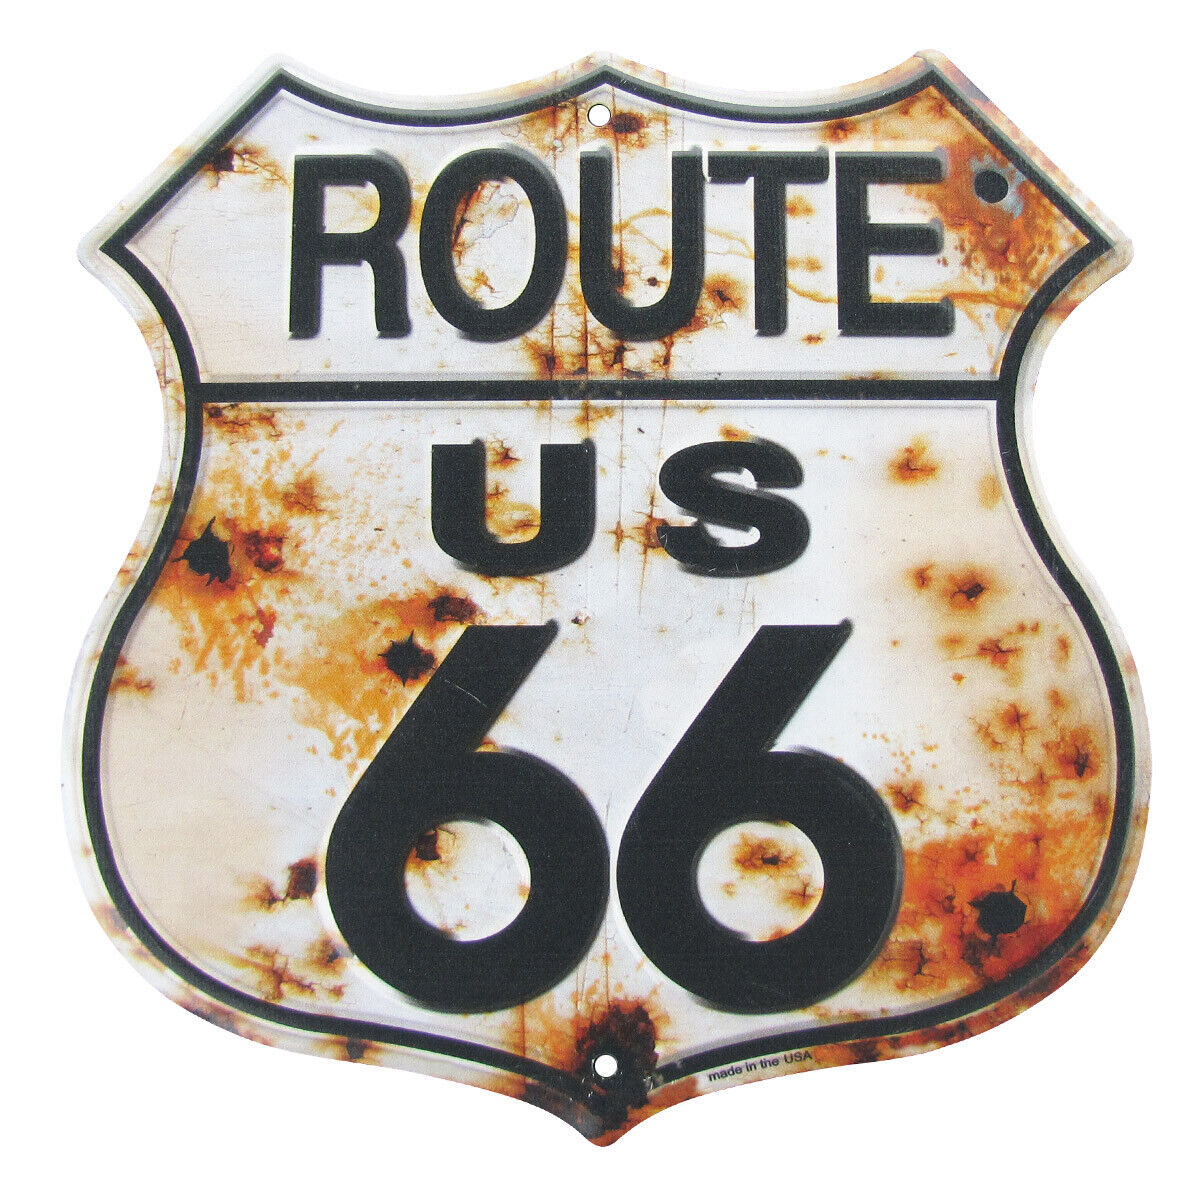 Rusty Highway Route 66 Tin Sign US Made Rustic Vintage Garage Bar Pub Wall Decor